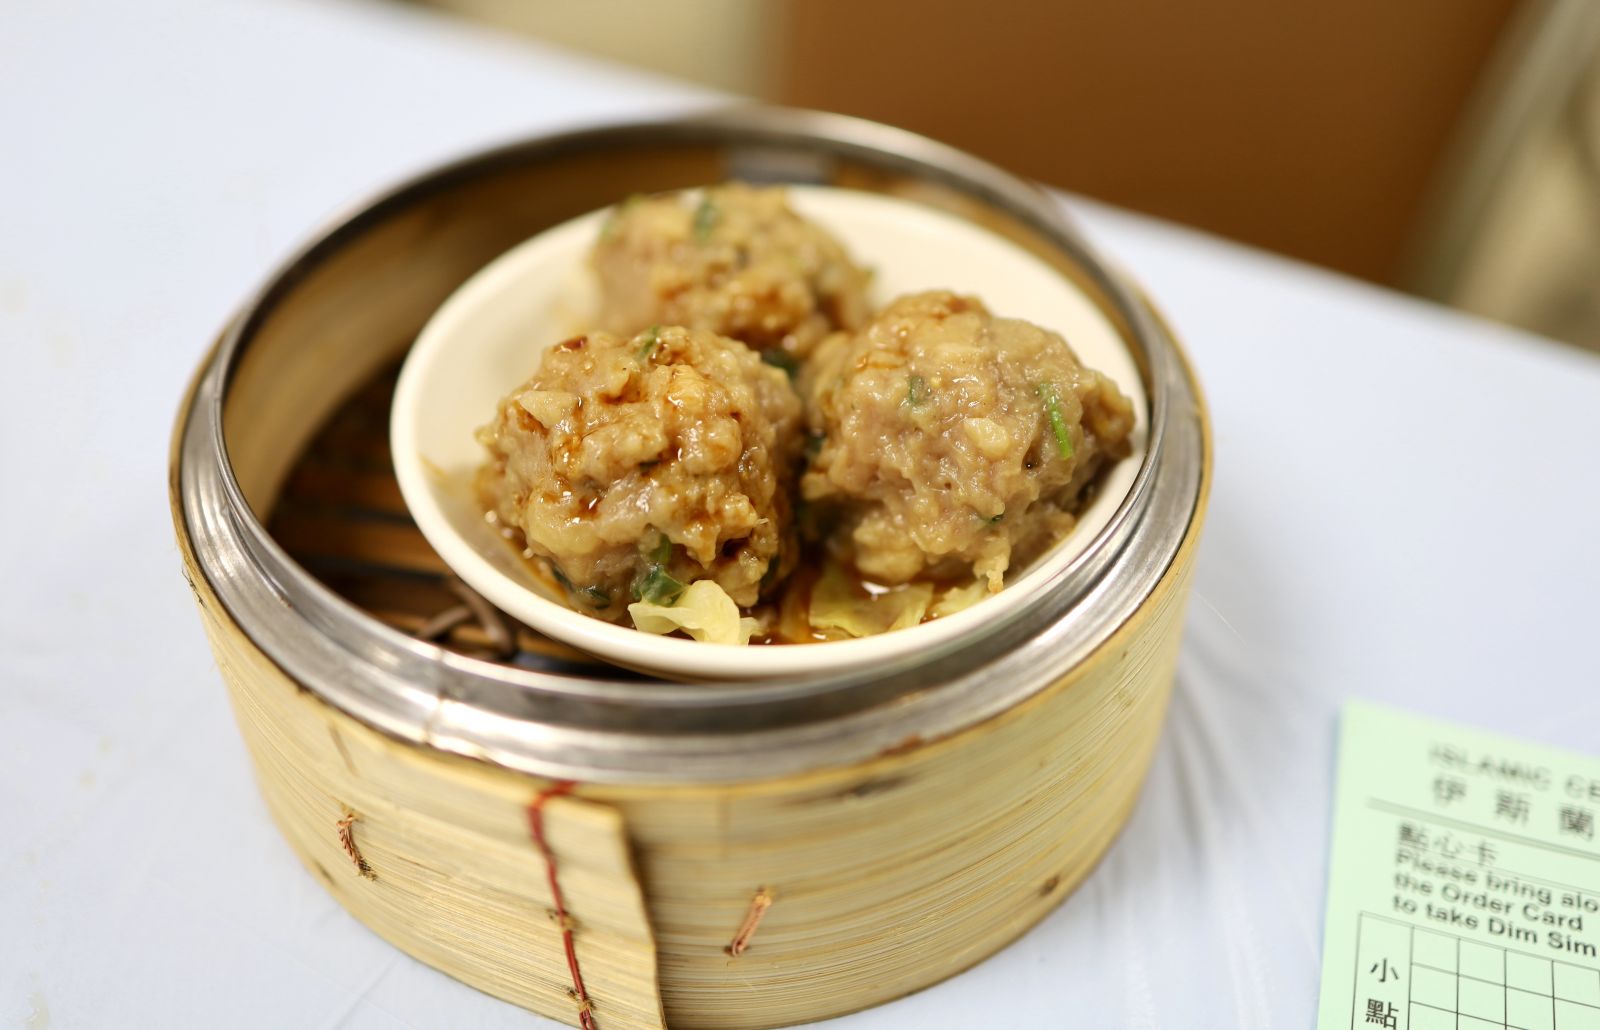 You’ll want to get in line for fresh, hot dimsum!